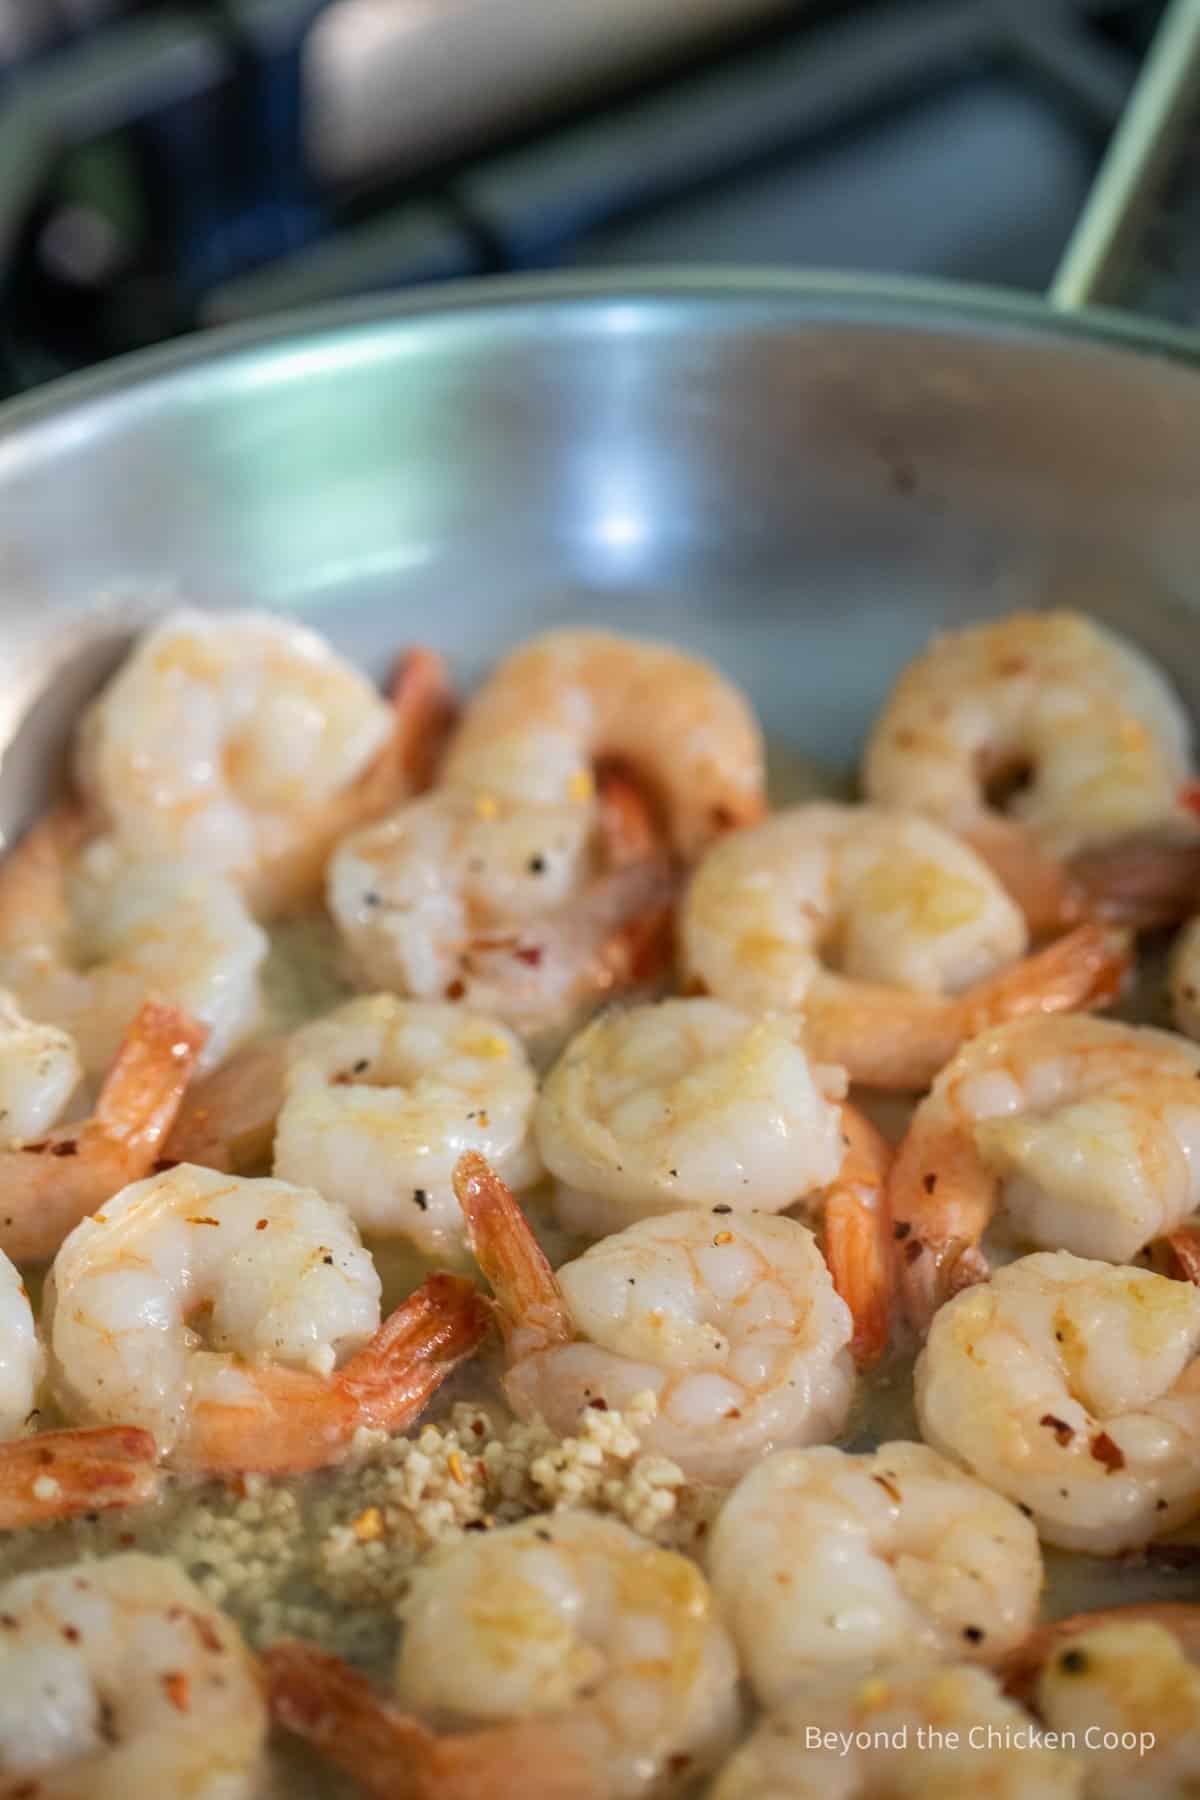 Shrimp cooking in a pan.